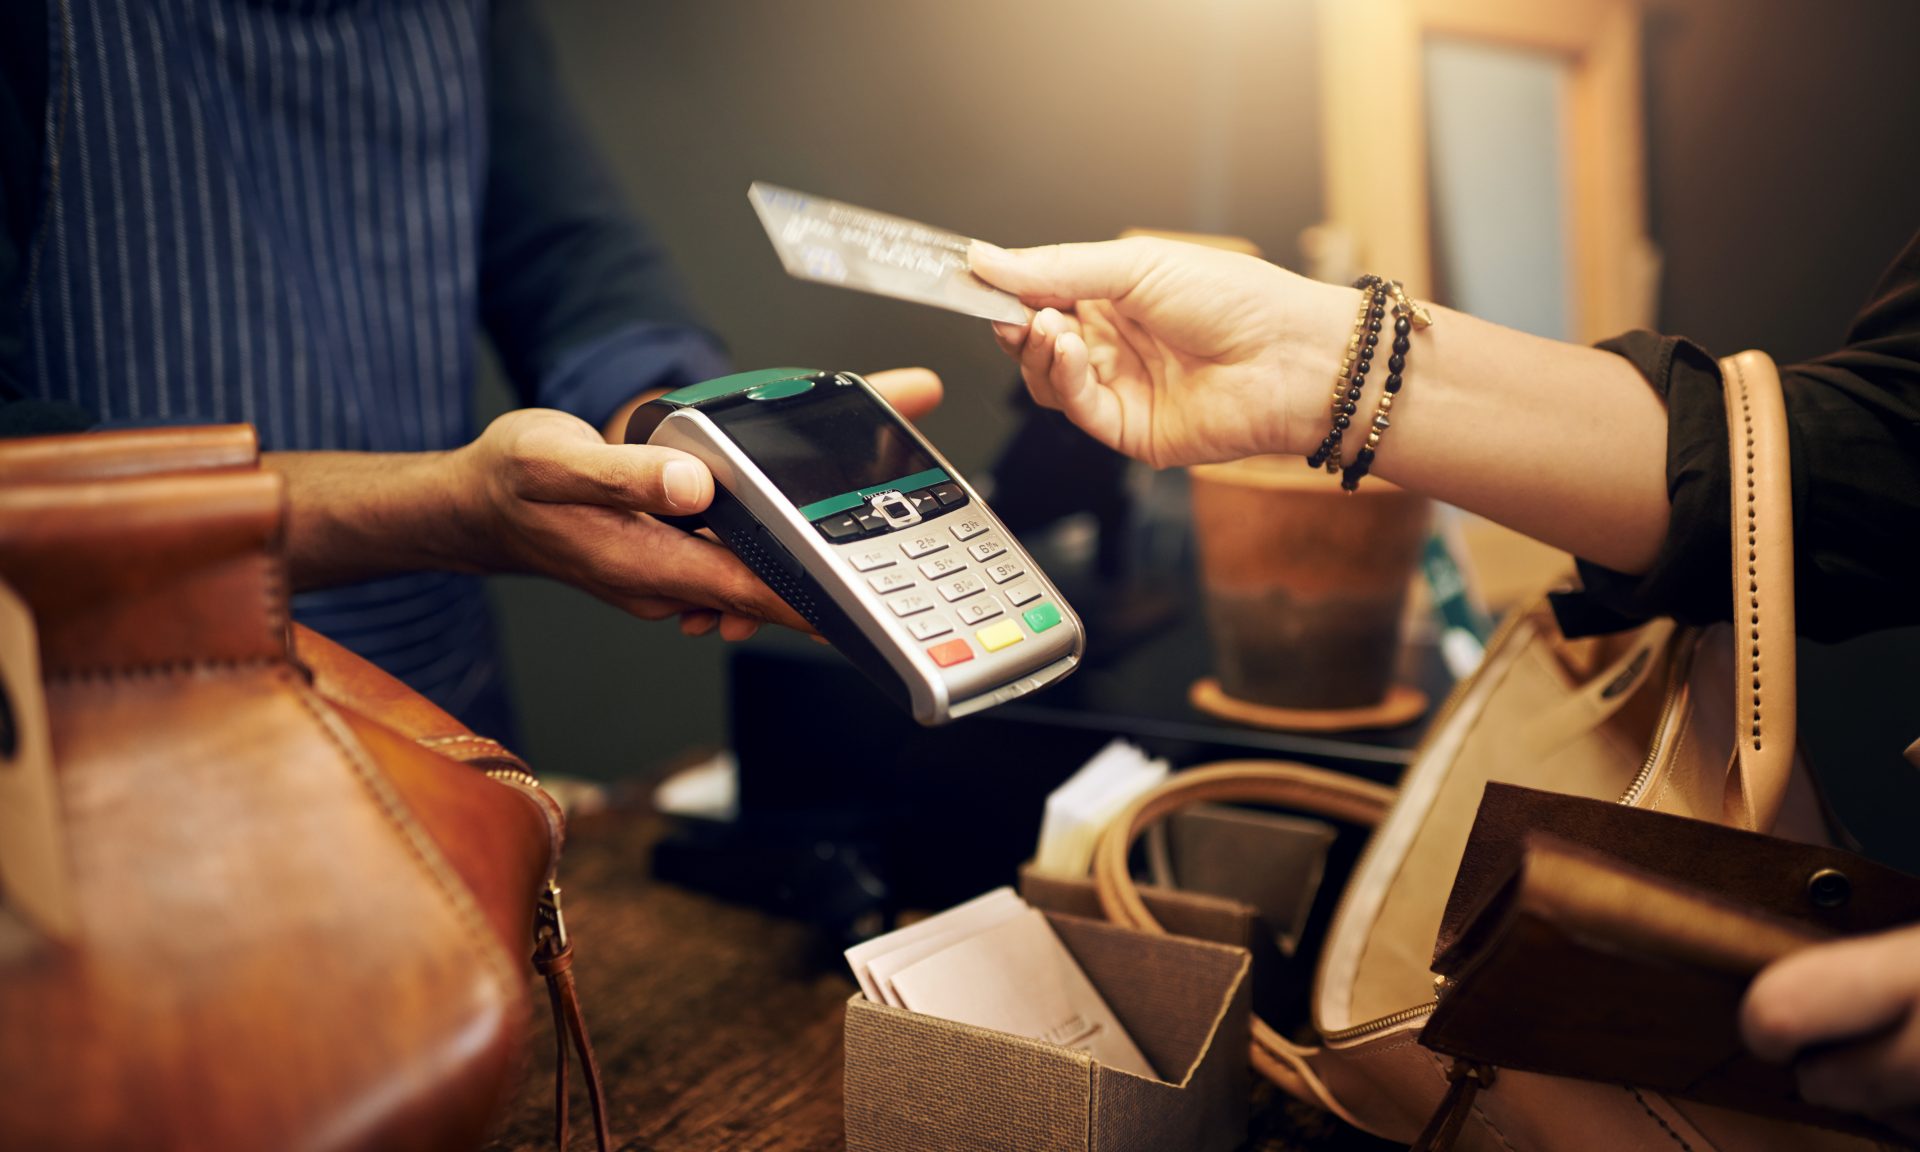 On Tap: Contactless Technology for These Capital One Cards - NerdWallet